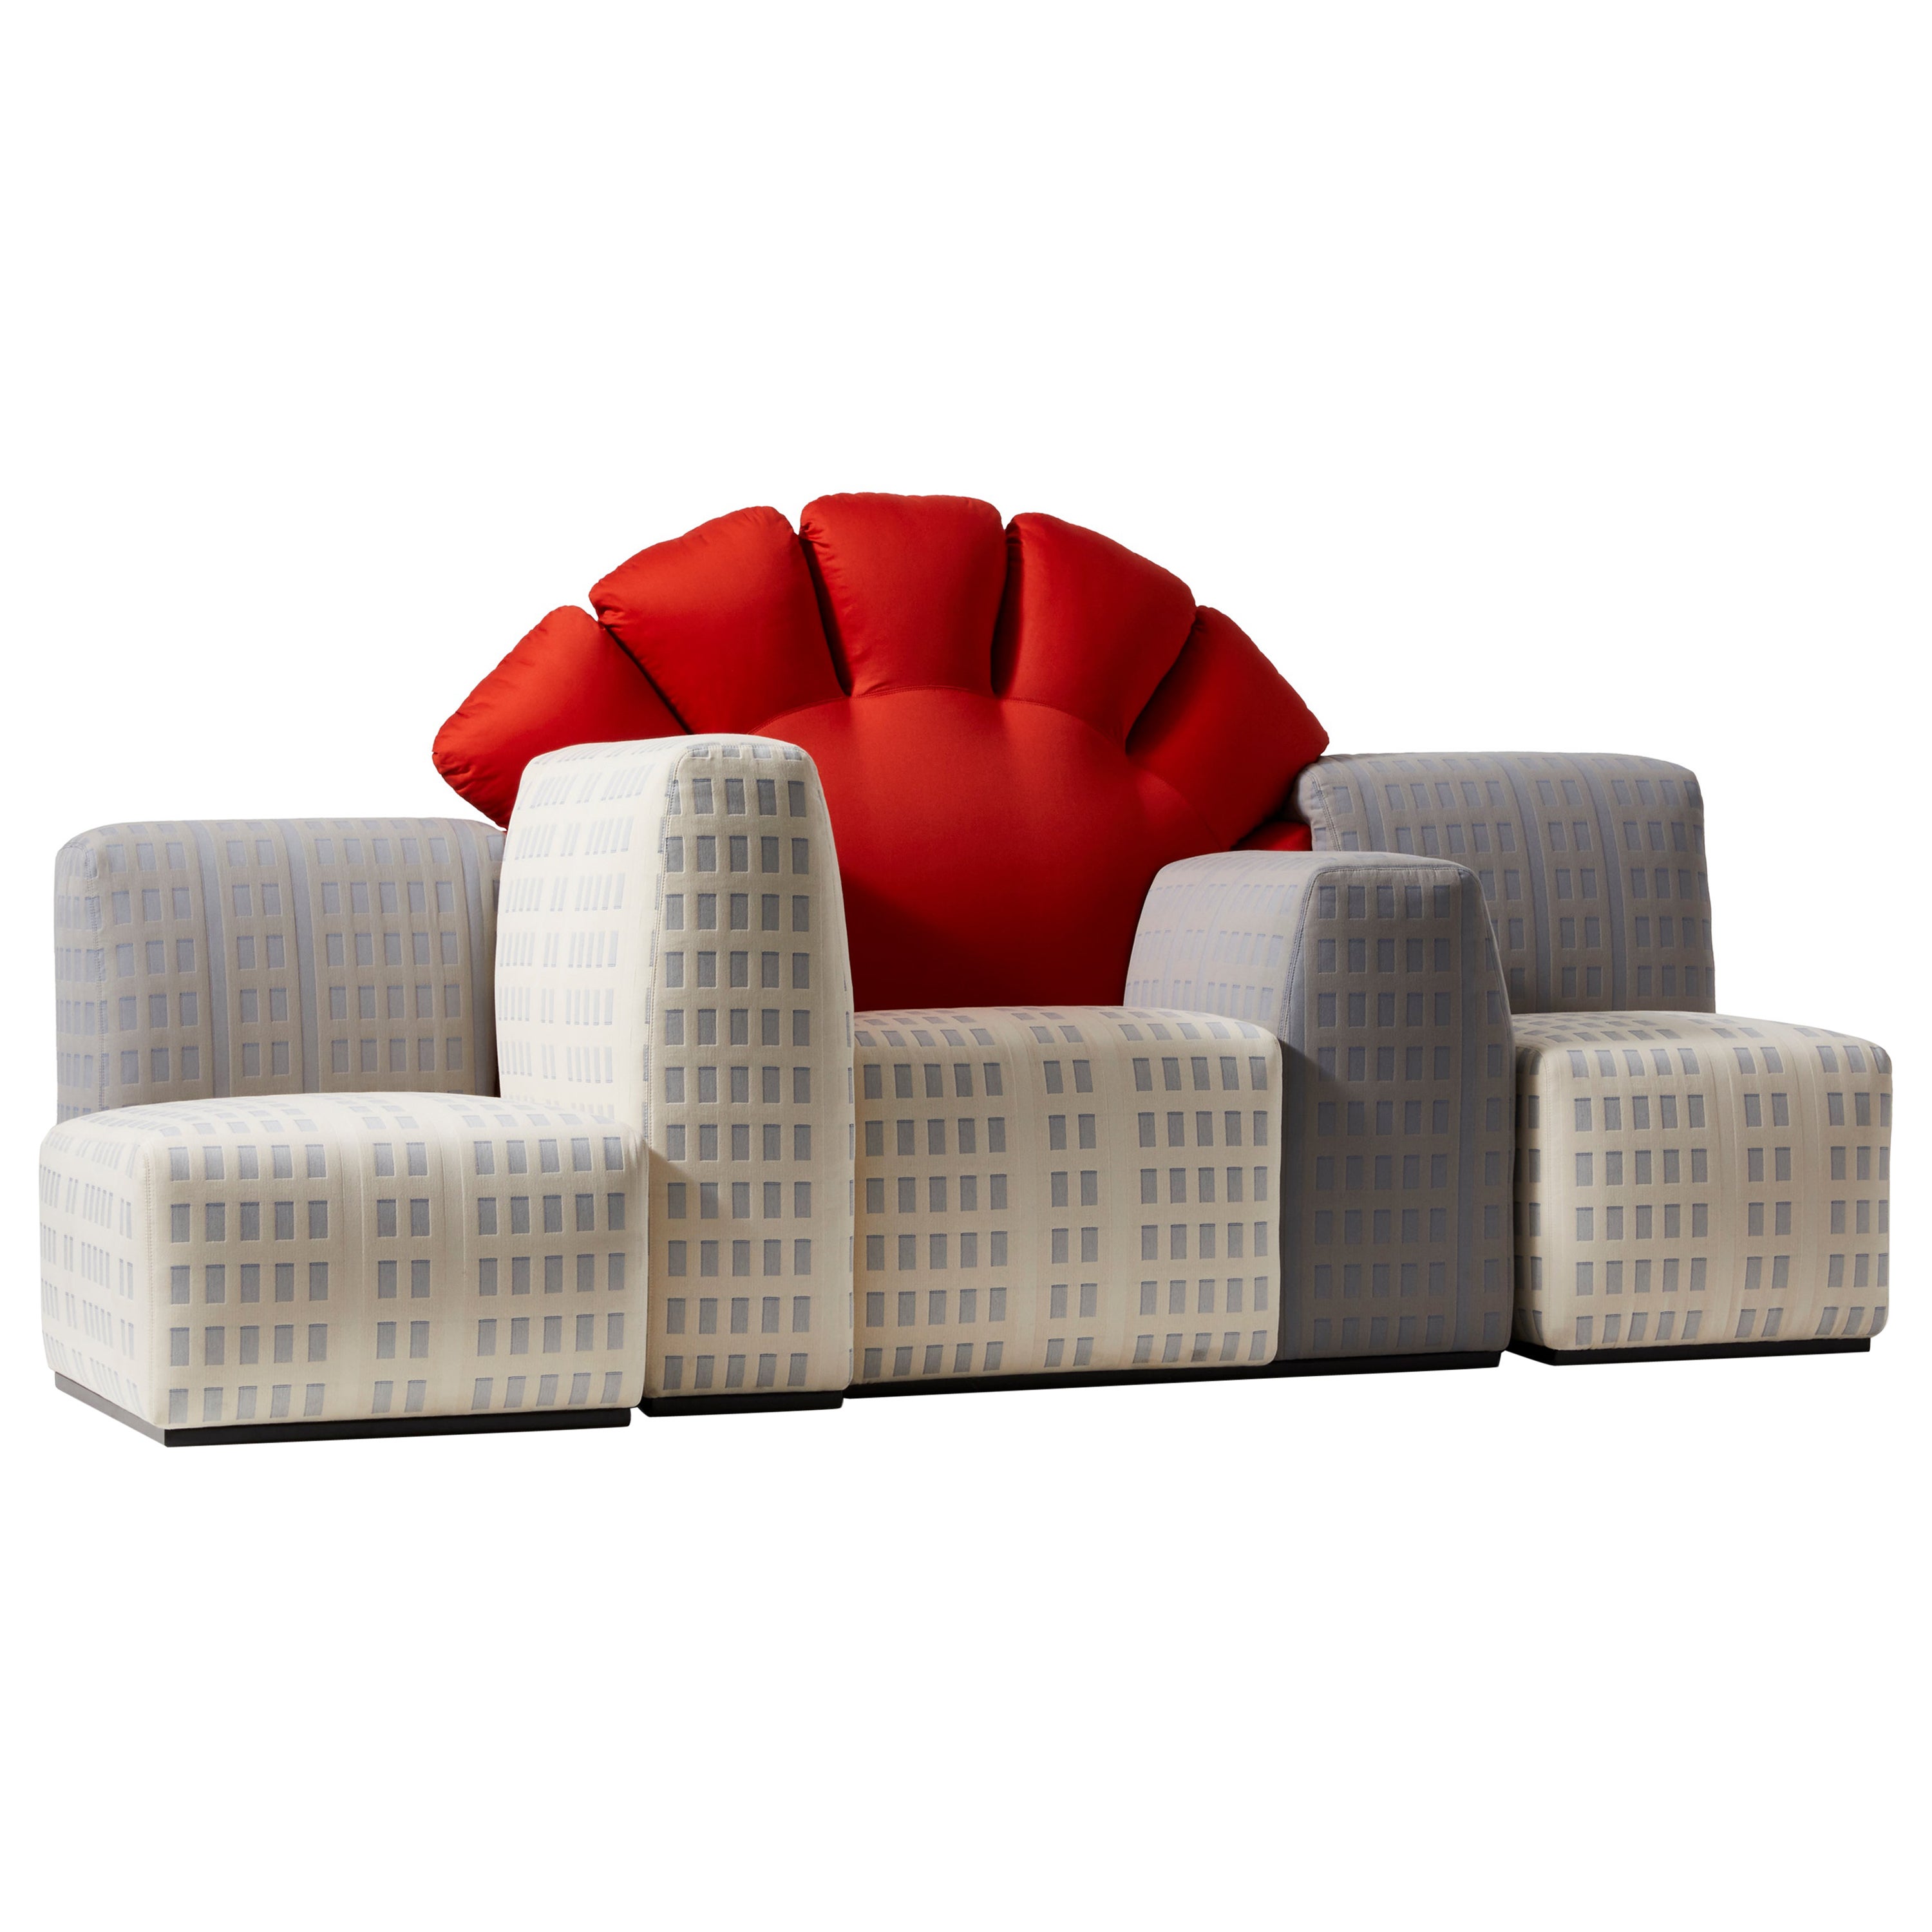 Limited Edition Tramonto A New York Sofa by Gaetano Pesce